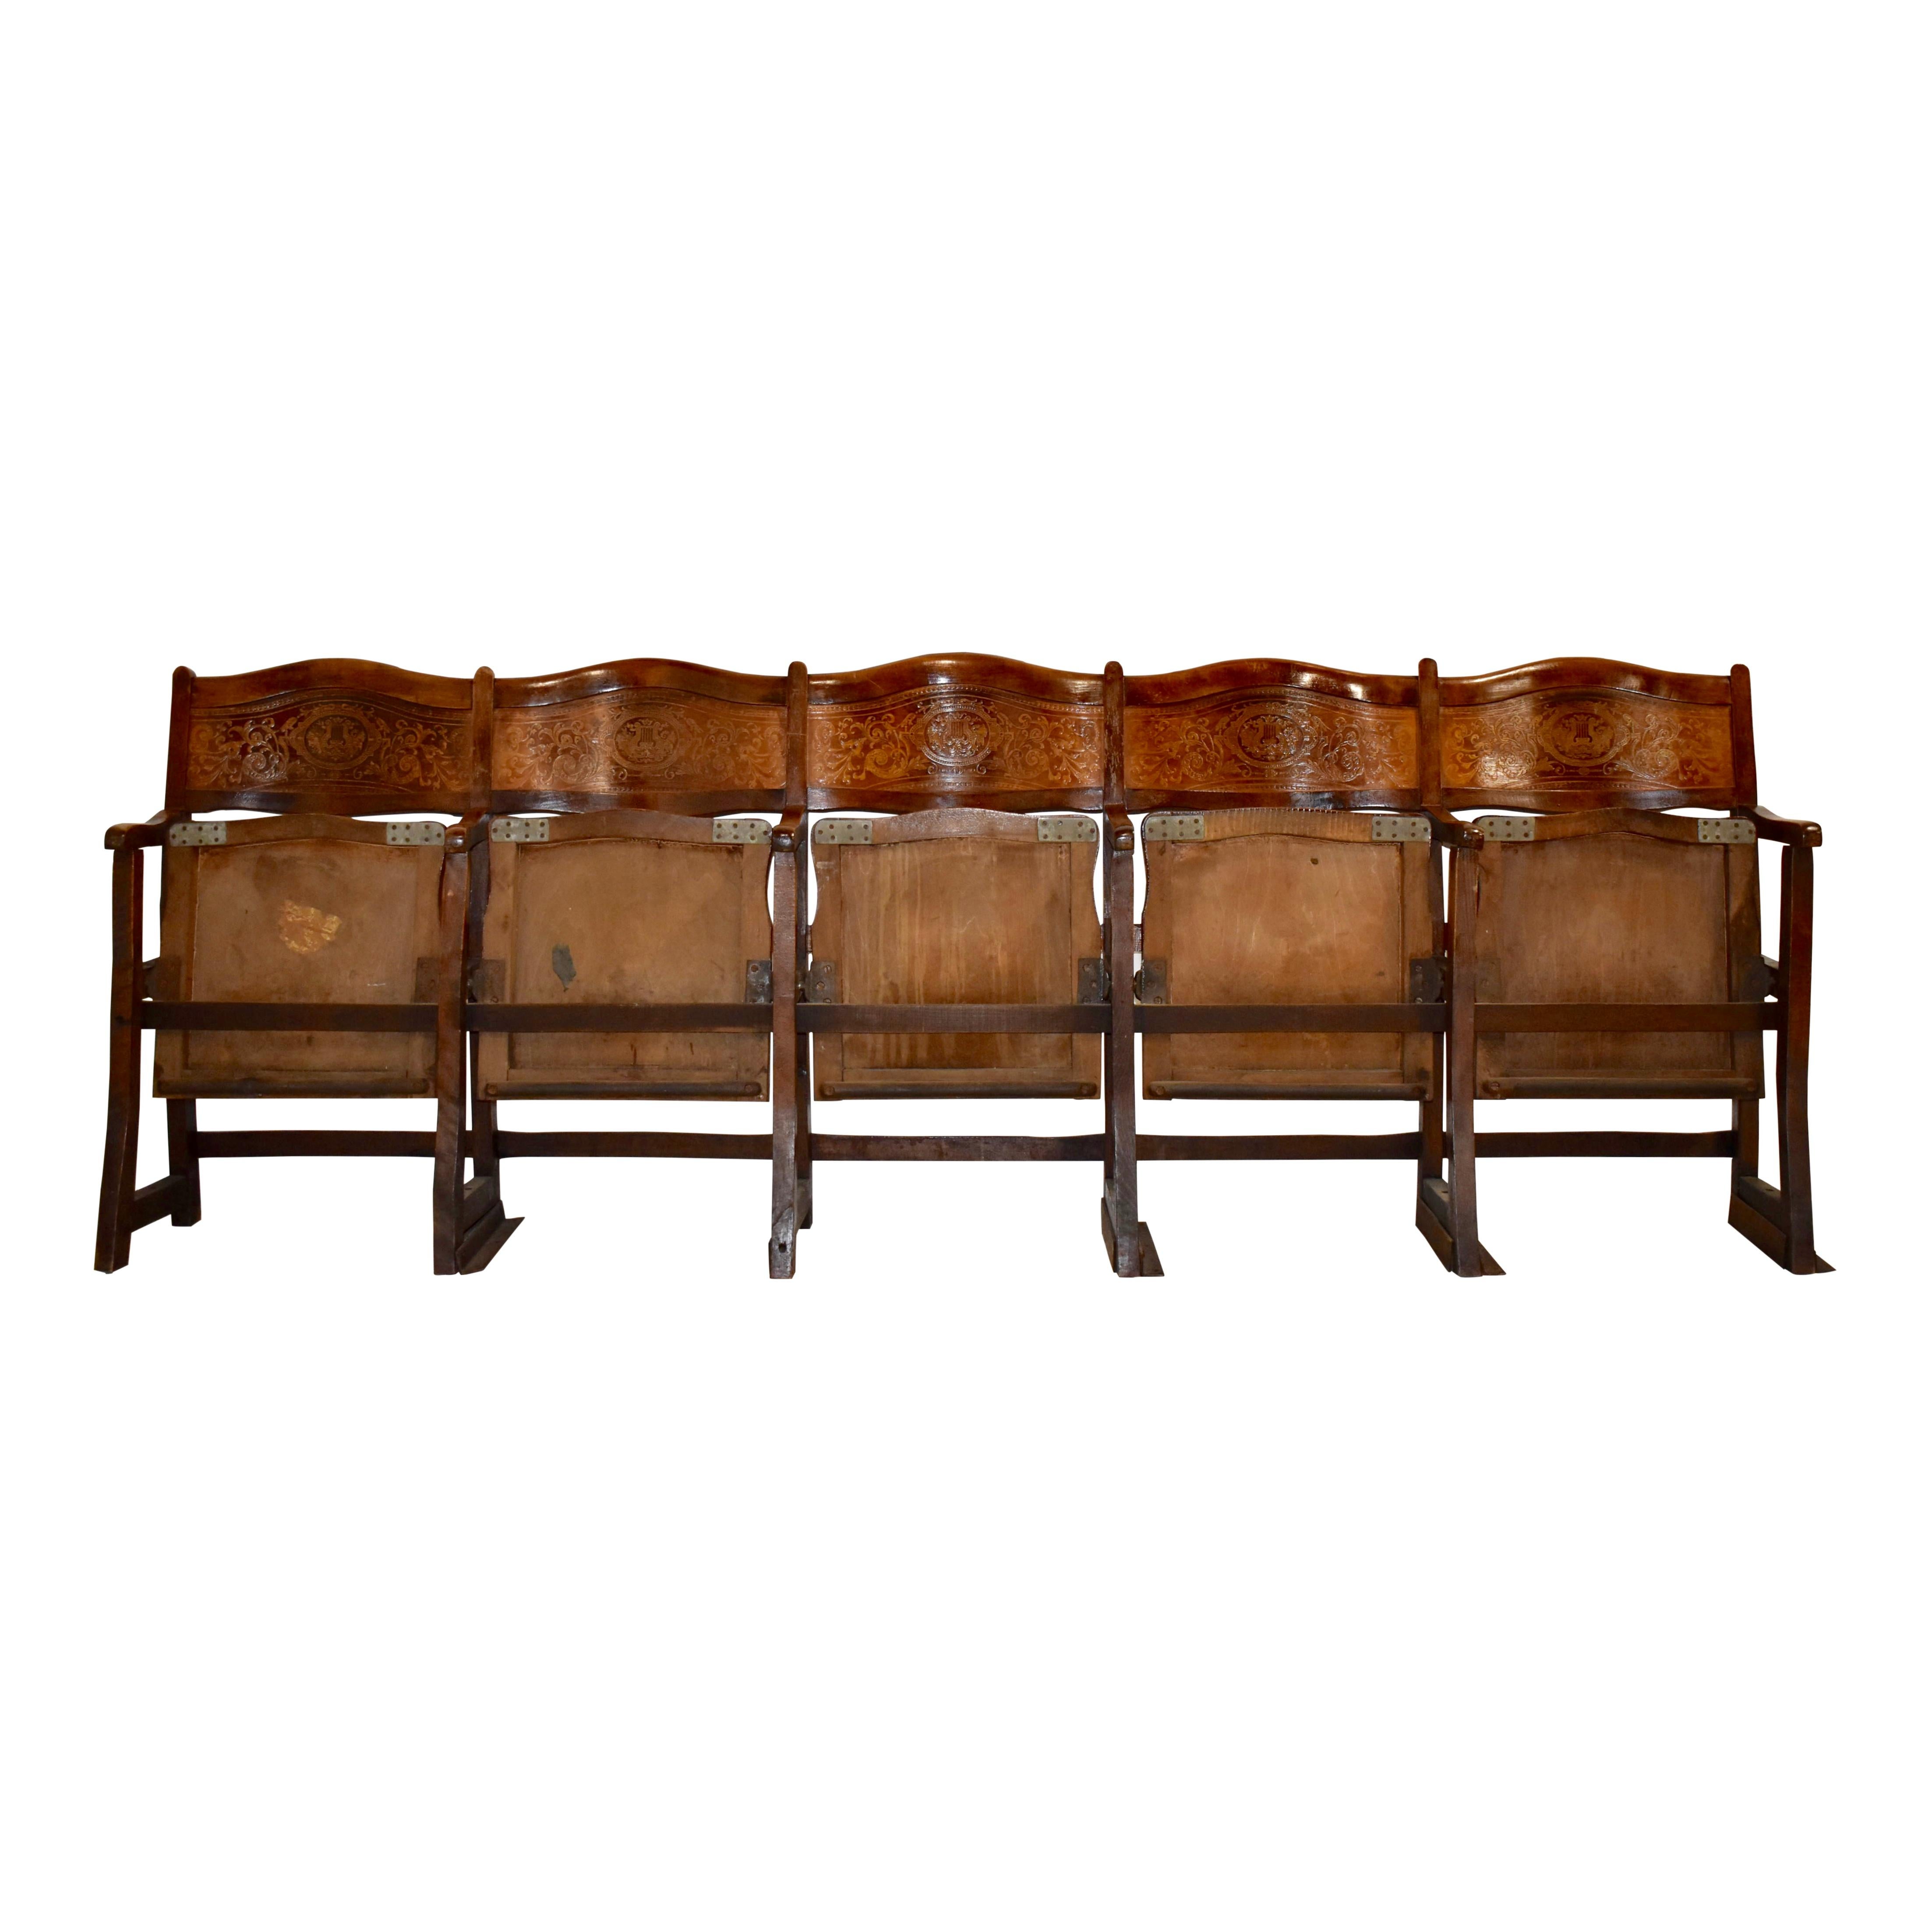 Art Nouveau Theatre Seats Row of Five Chairs, circa 1910 For Sale 5